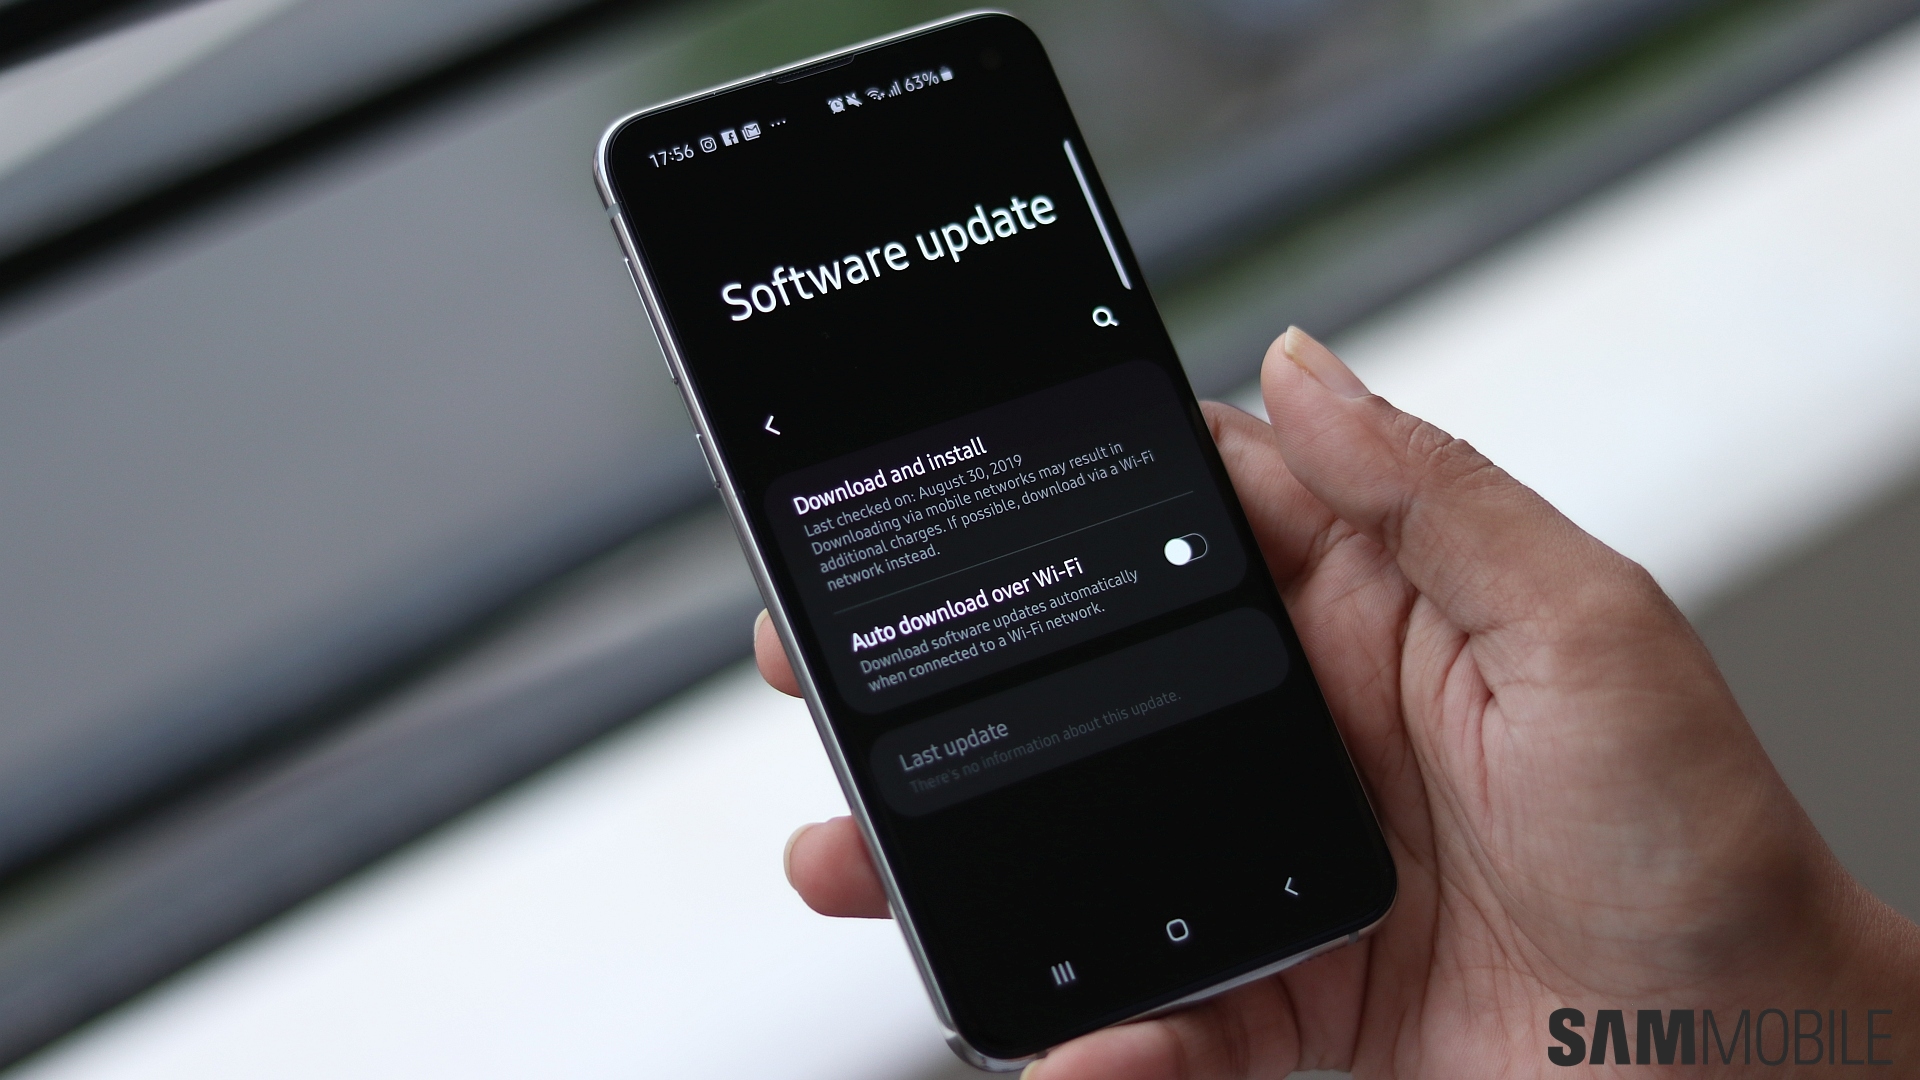 November 2022 update has landed on Galaxy S10e and Tab Active 3 LTE